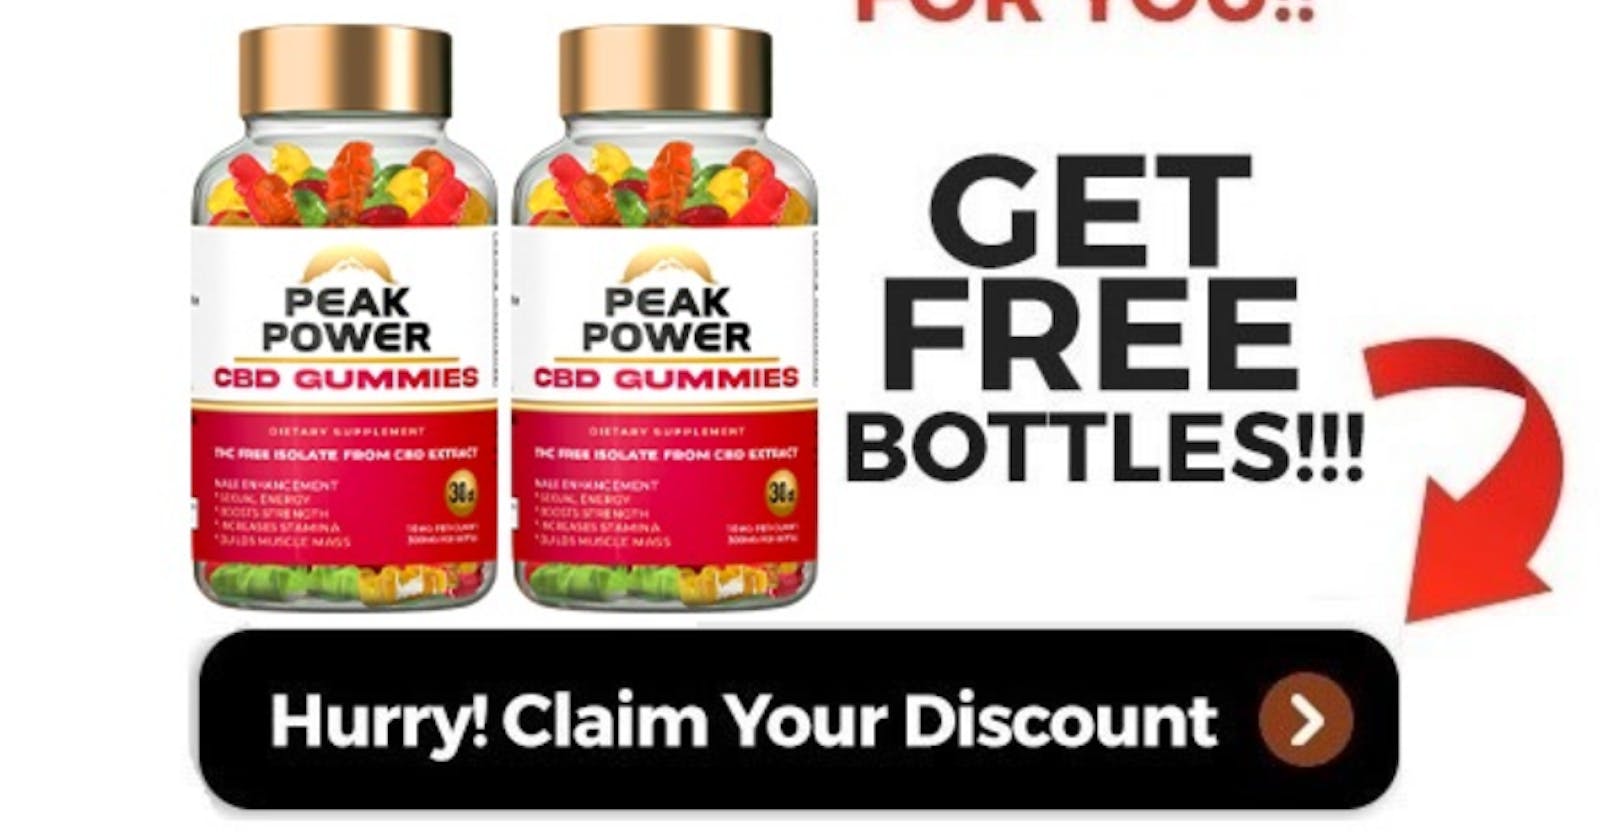 Peak Power CBD Gummies Reviews {TOTAL SCAM} See This Report? Then Justify!